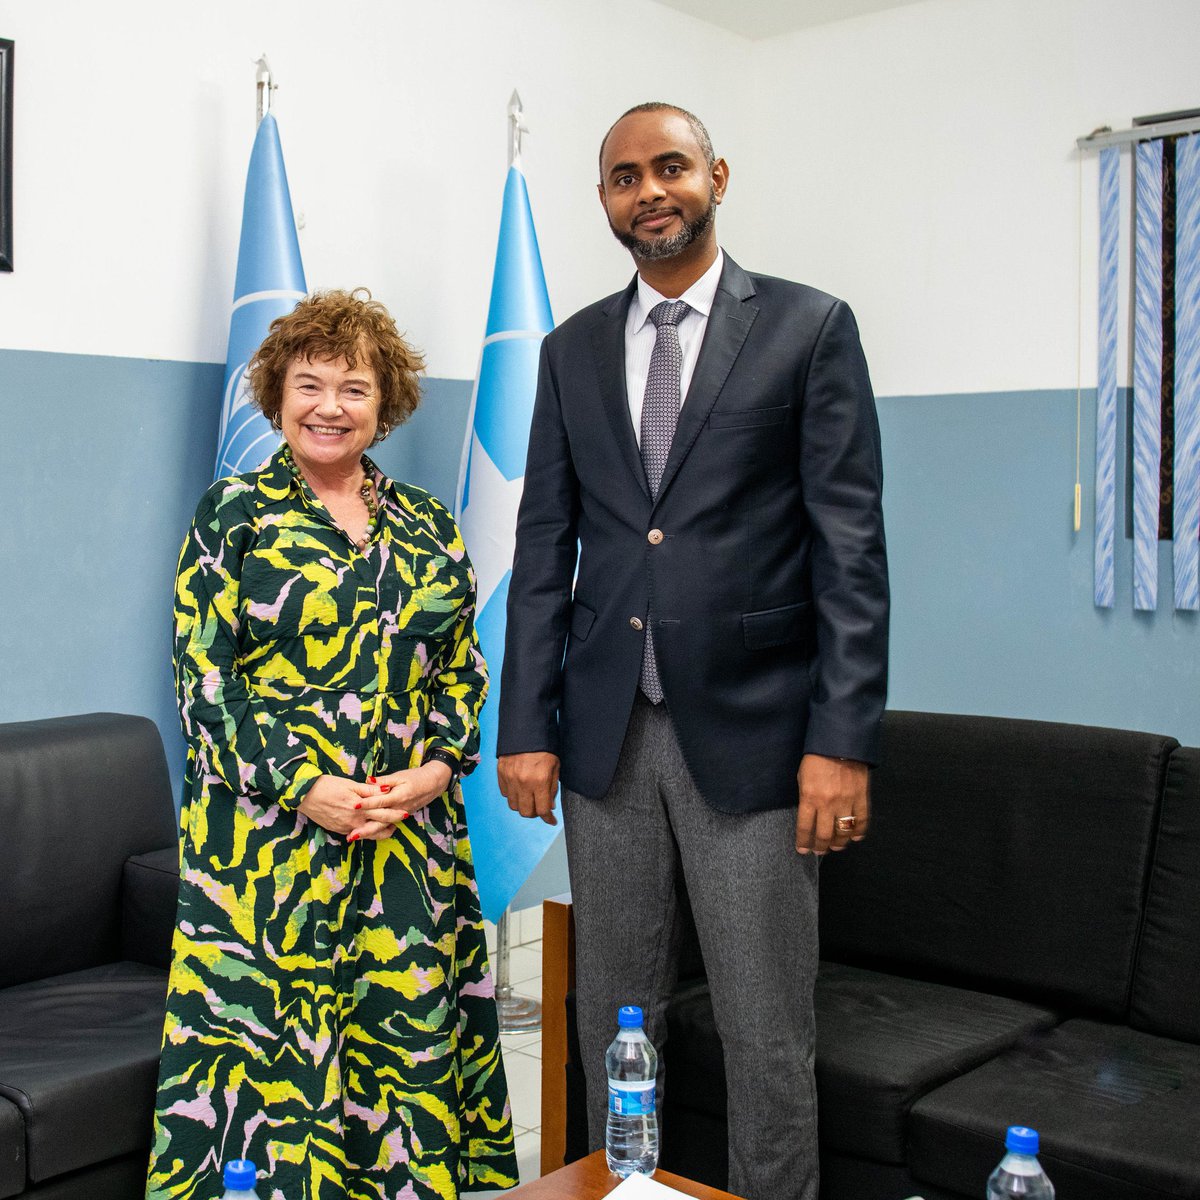 In a farewell meeting, Minister of Defence, @AMohamedNur and @UNSomalia’s @CatrionaLaing1, who is concluding her term, discussed ongoing offensive against Al-Shabaab and Somalia’s security transition from @ATMIS_Somalia to SSF. They emphasized the need for enhanced…